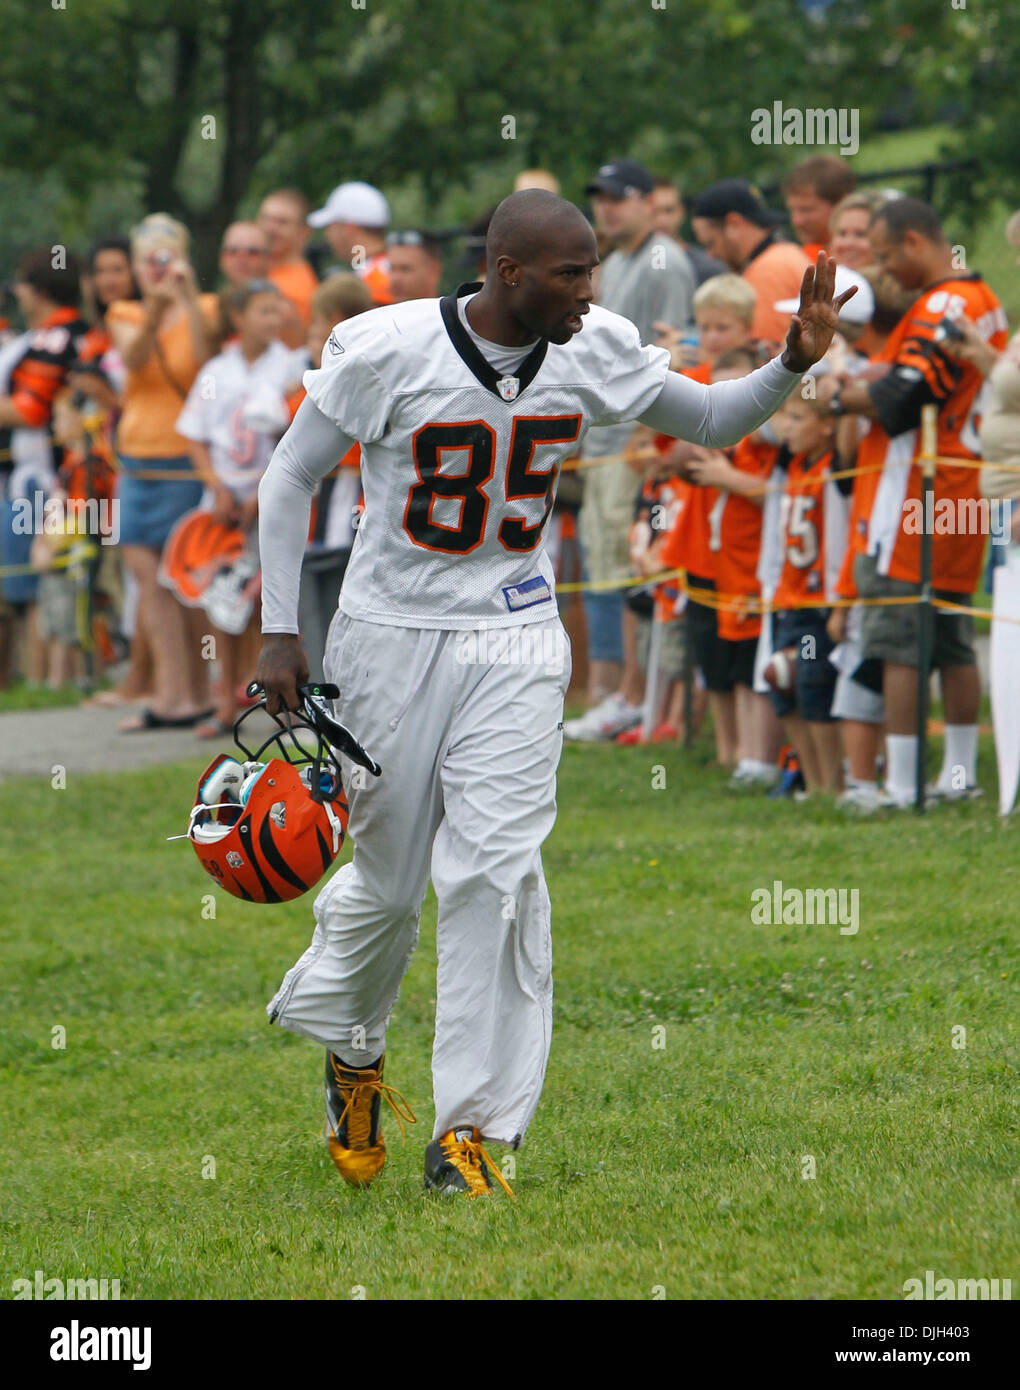 Cincinnati Bengals wide receiver Chad Johnson (85) gets tackled by